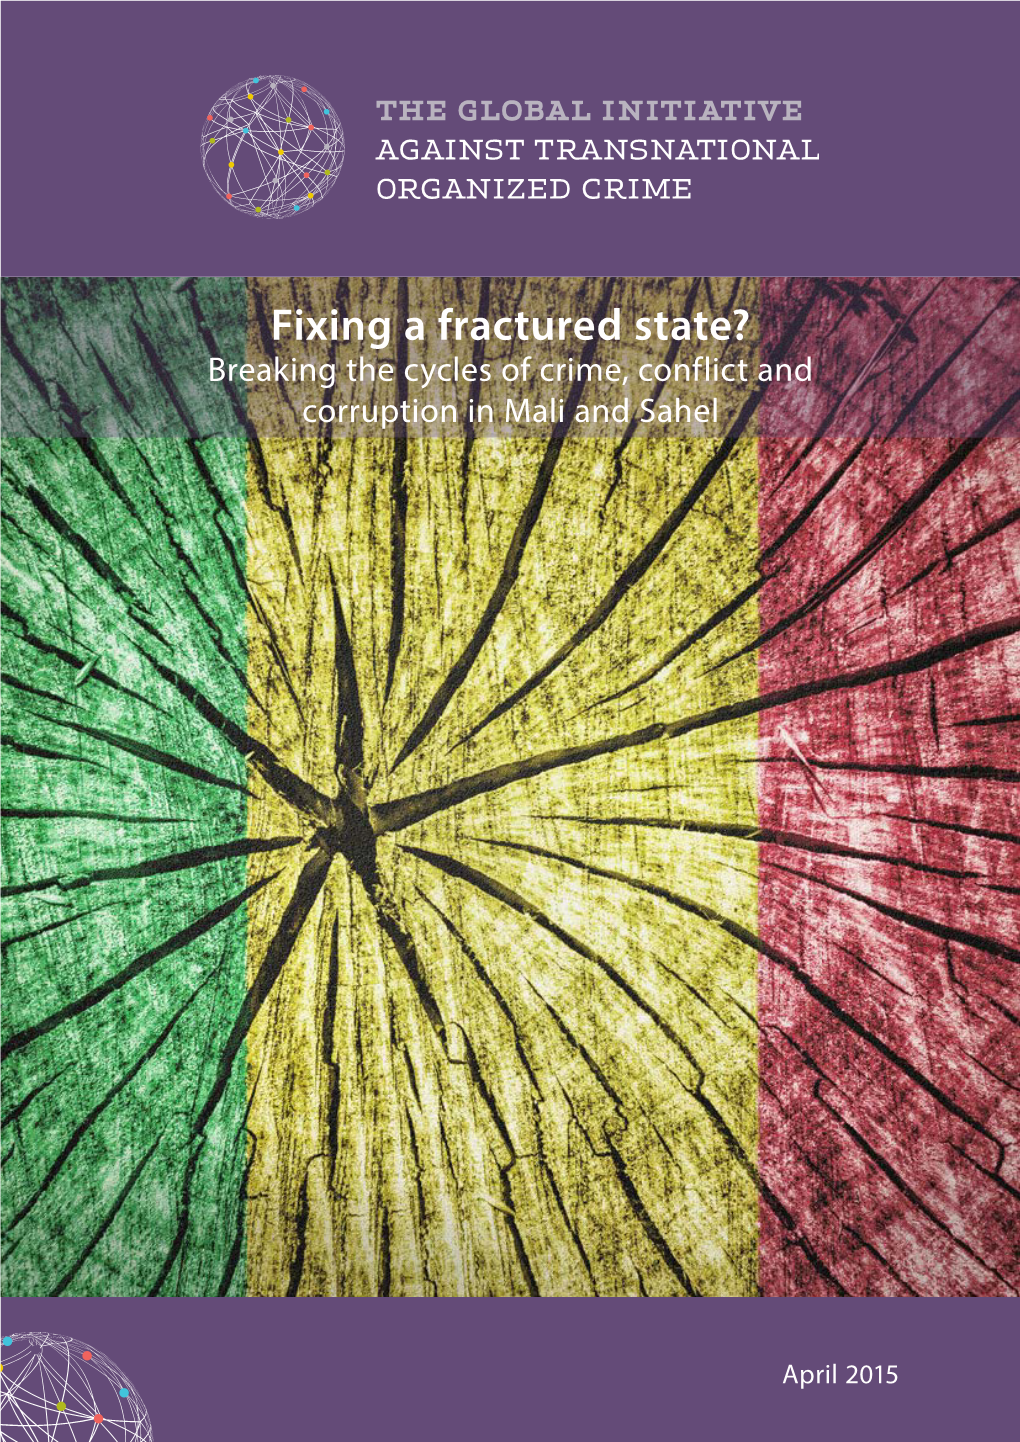 Fixing a Fractured State? Breaking the Cycles of Crime, Conflict and Corruption in Mali and Sahel